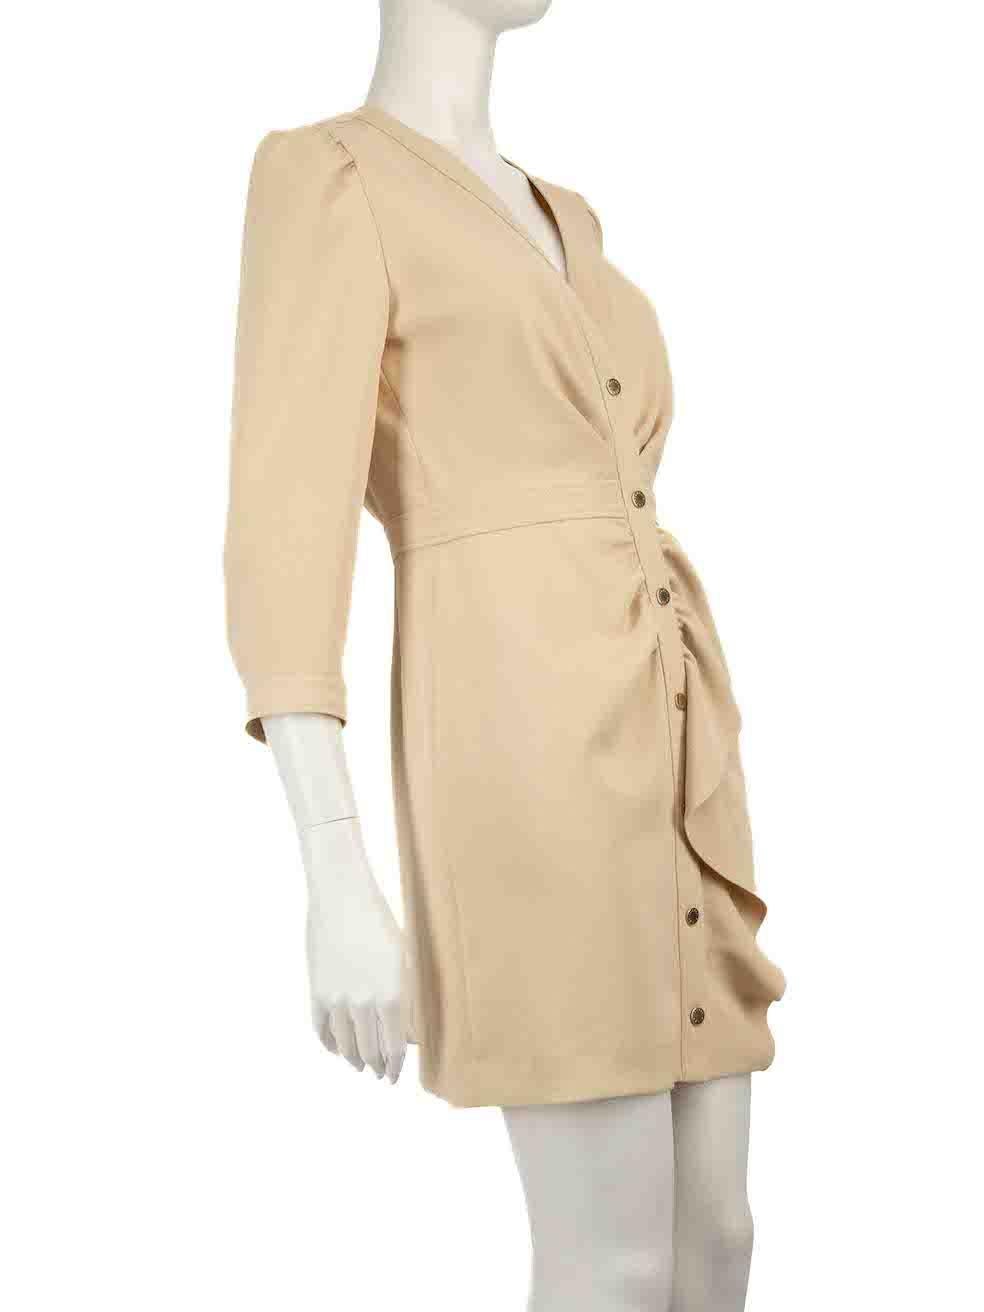 CONDITION is Very good. Minimal wear to dress is evident. Small marks on the centre front near the first two buttons on this used Sandro designer resale item.
 
 
 
 Details
 
 
 Beige
 
 Polyester
 
 Dress
 
 Mini
 
 Ruched detail
 
 Front snap